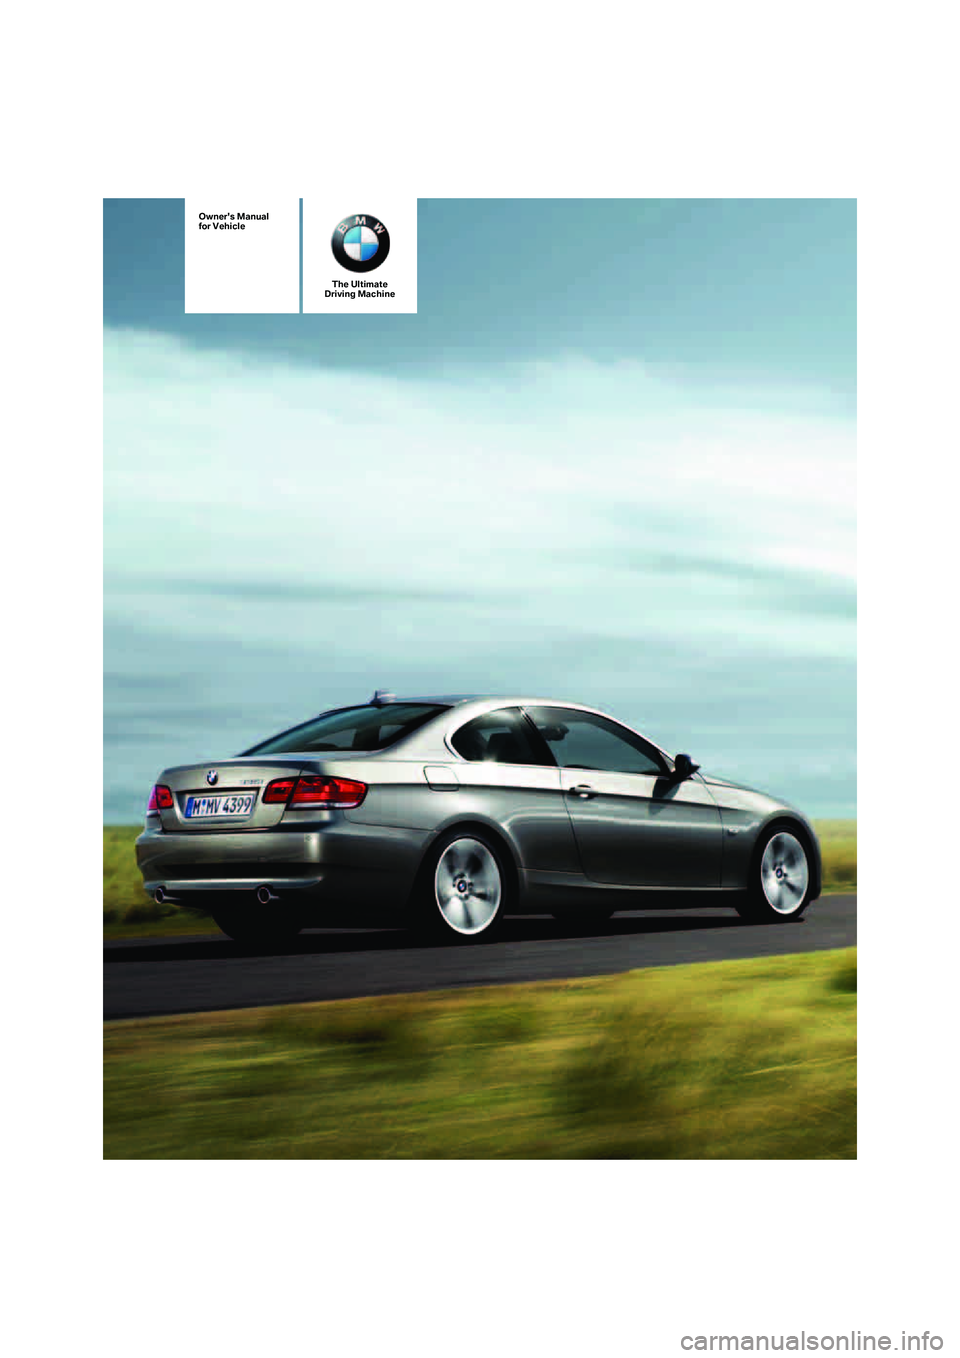 BMW 330CI IDRIVE COUPE 2006  Owners Manual The Ultimate
Driving Machine
Owners Manual
for Vehicle
ba8_E9293_US.book  Seite 1  Freitag, 5. Mai 2006  1:02 13 